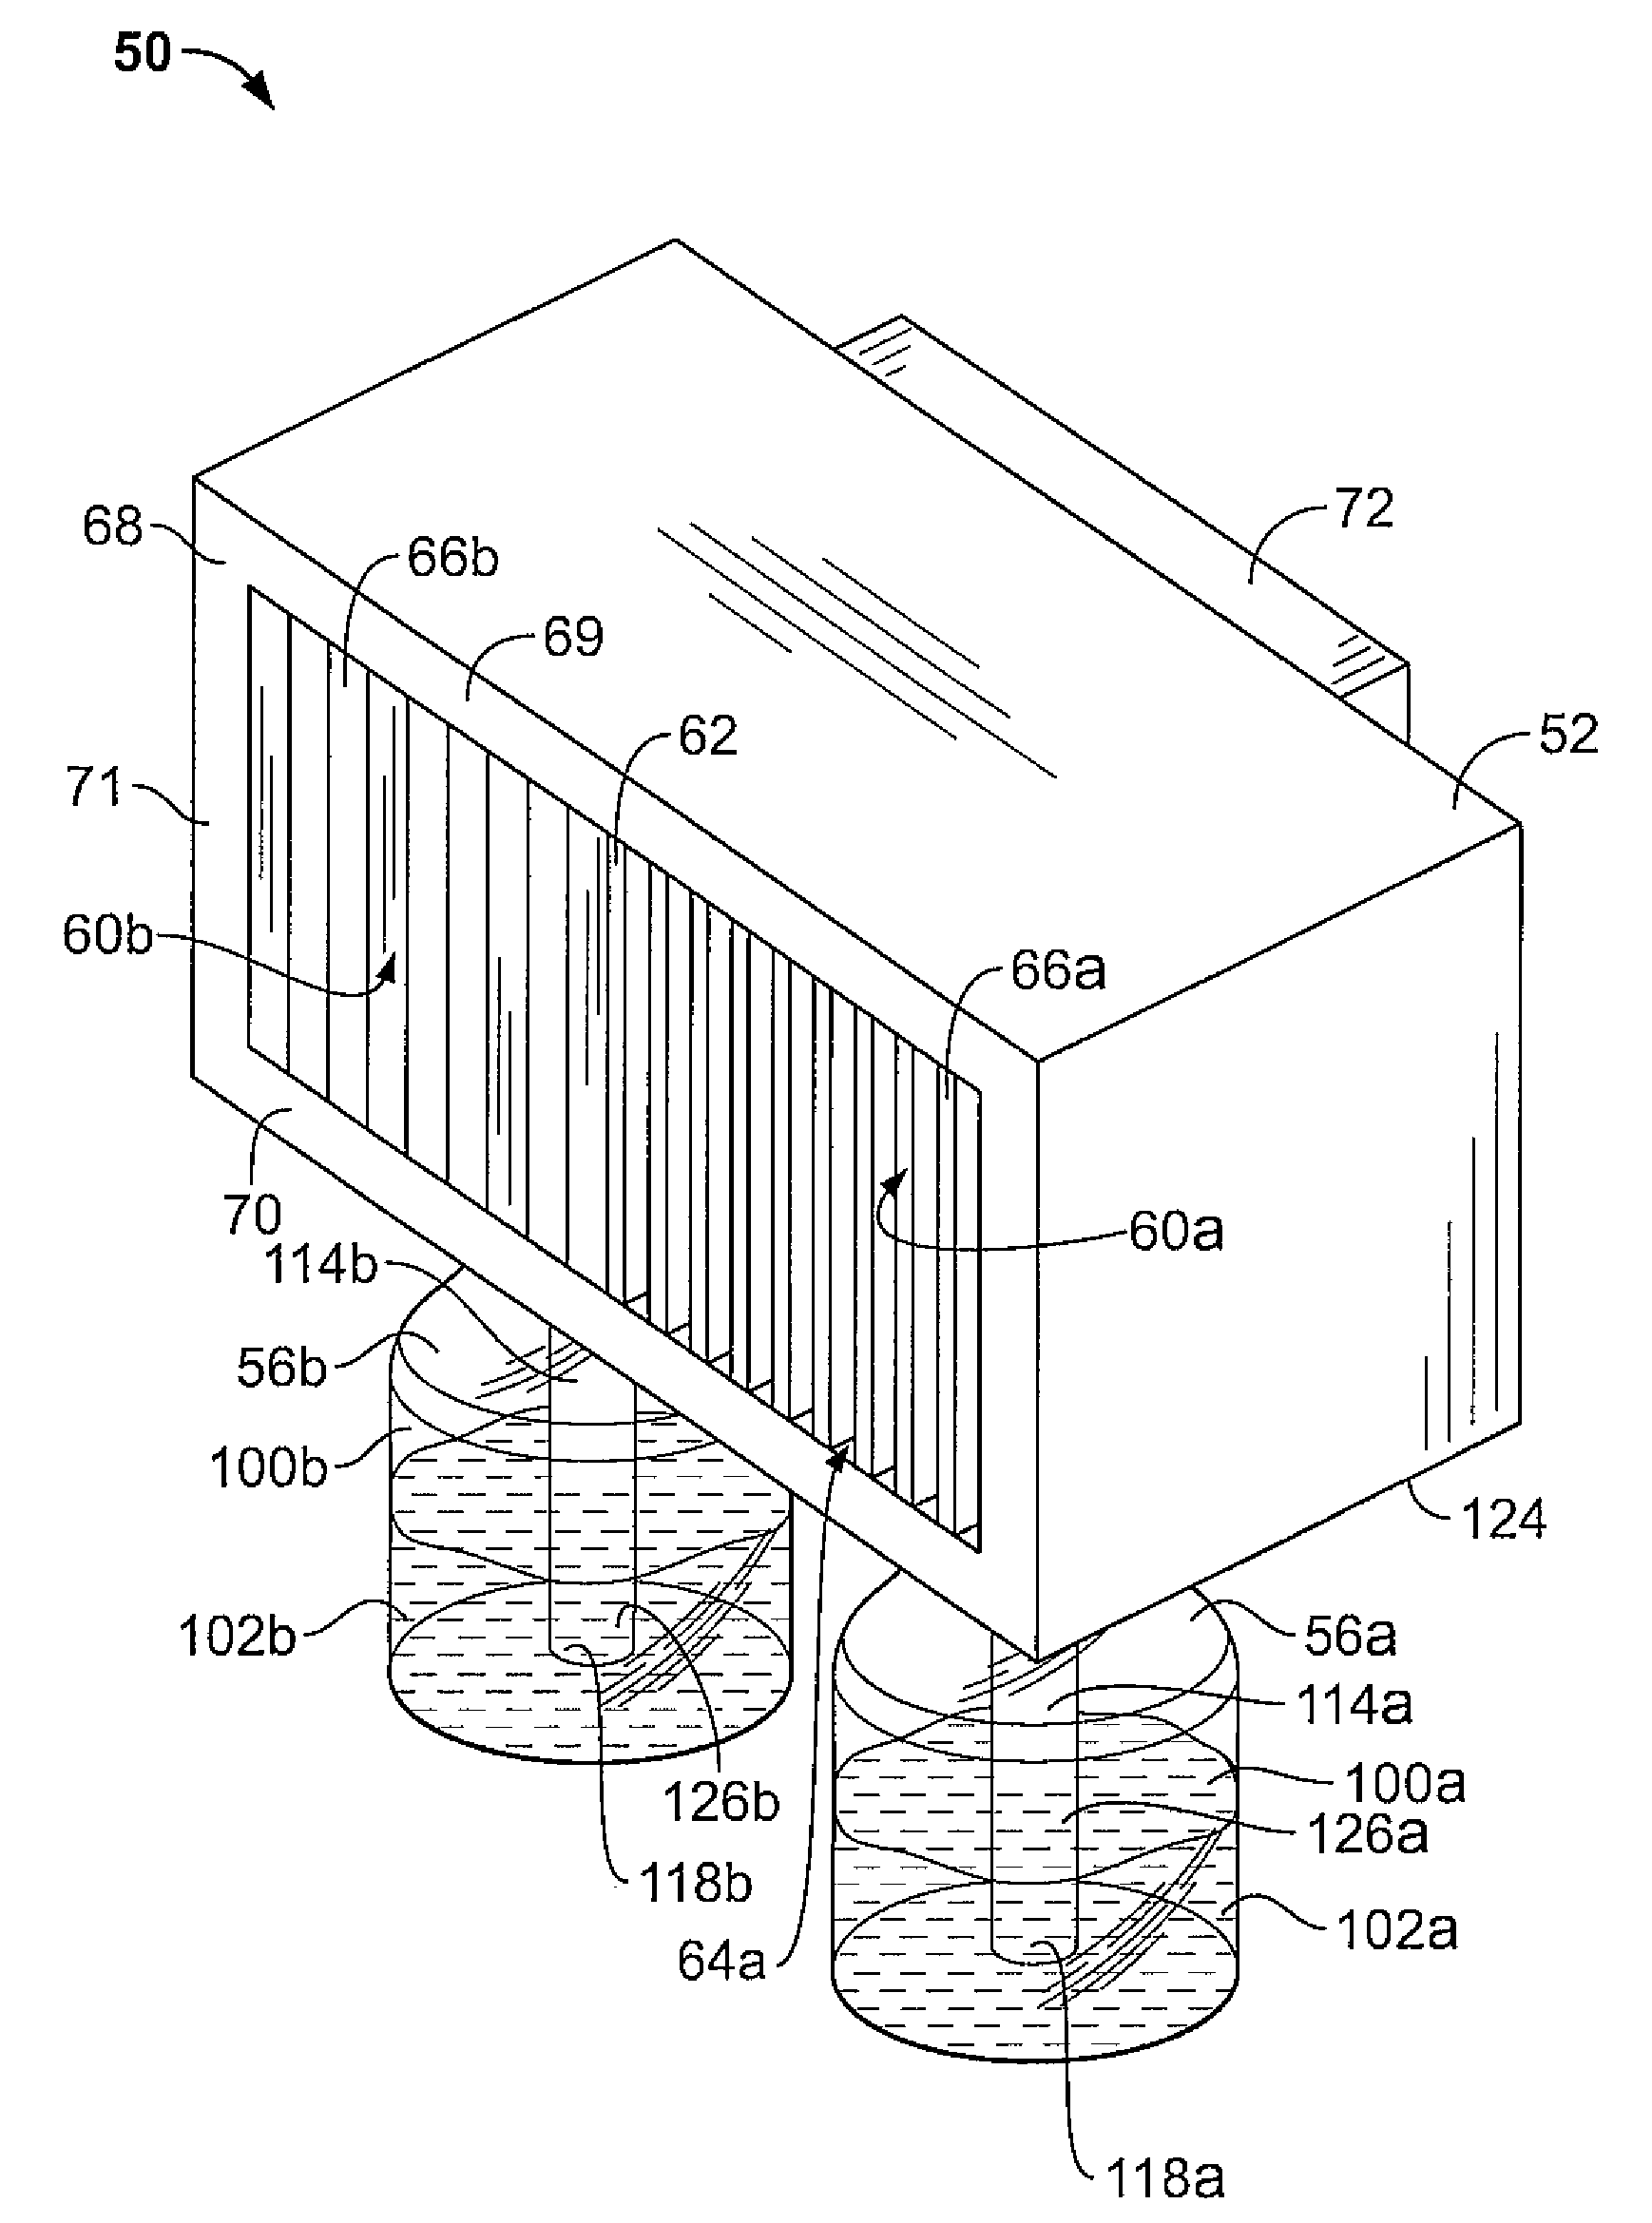 Method and Apparatus for Dispensing a Fragrance